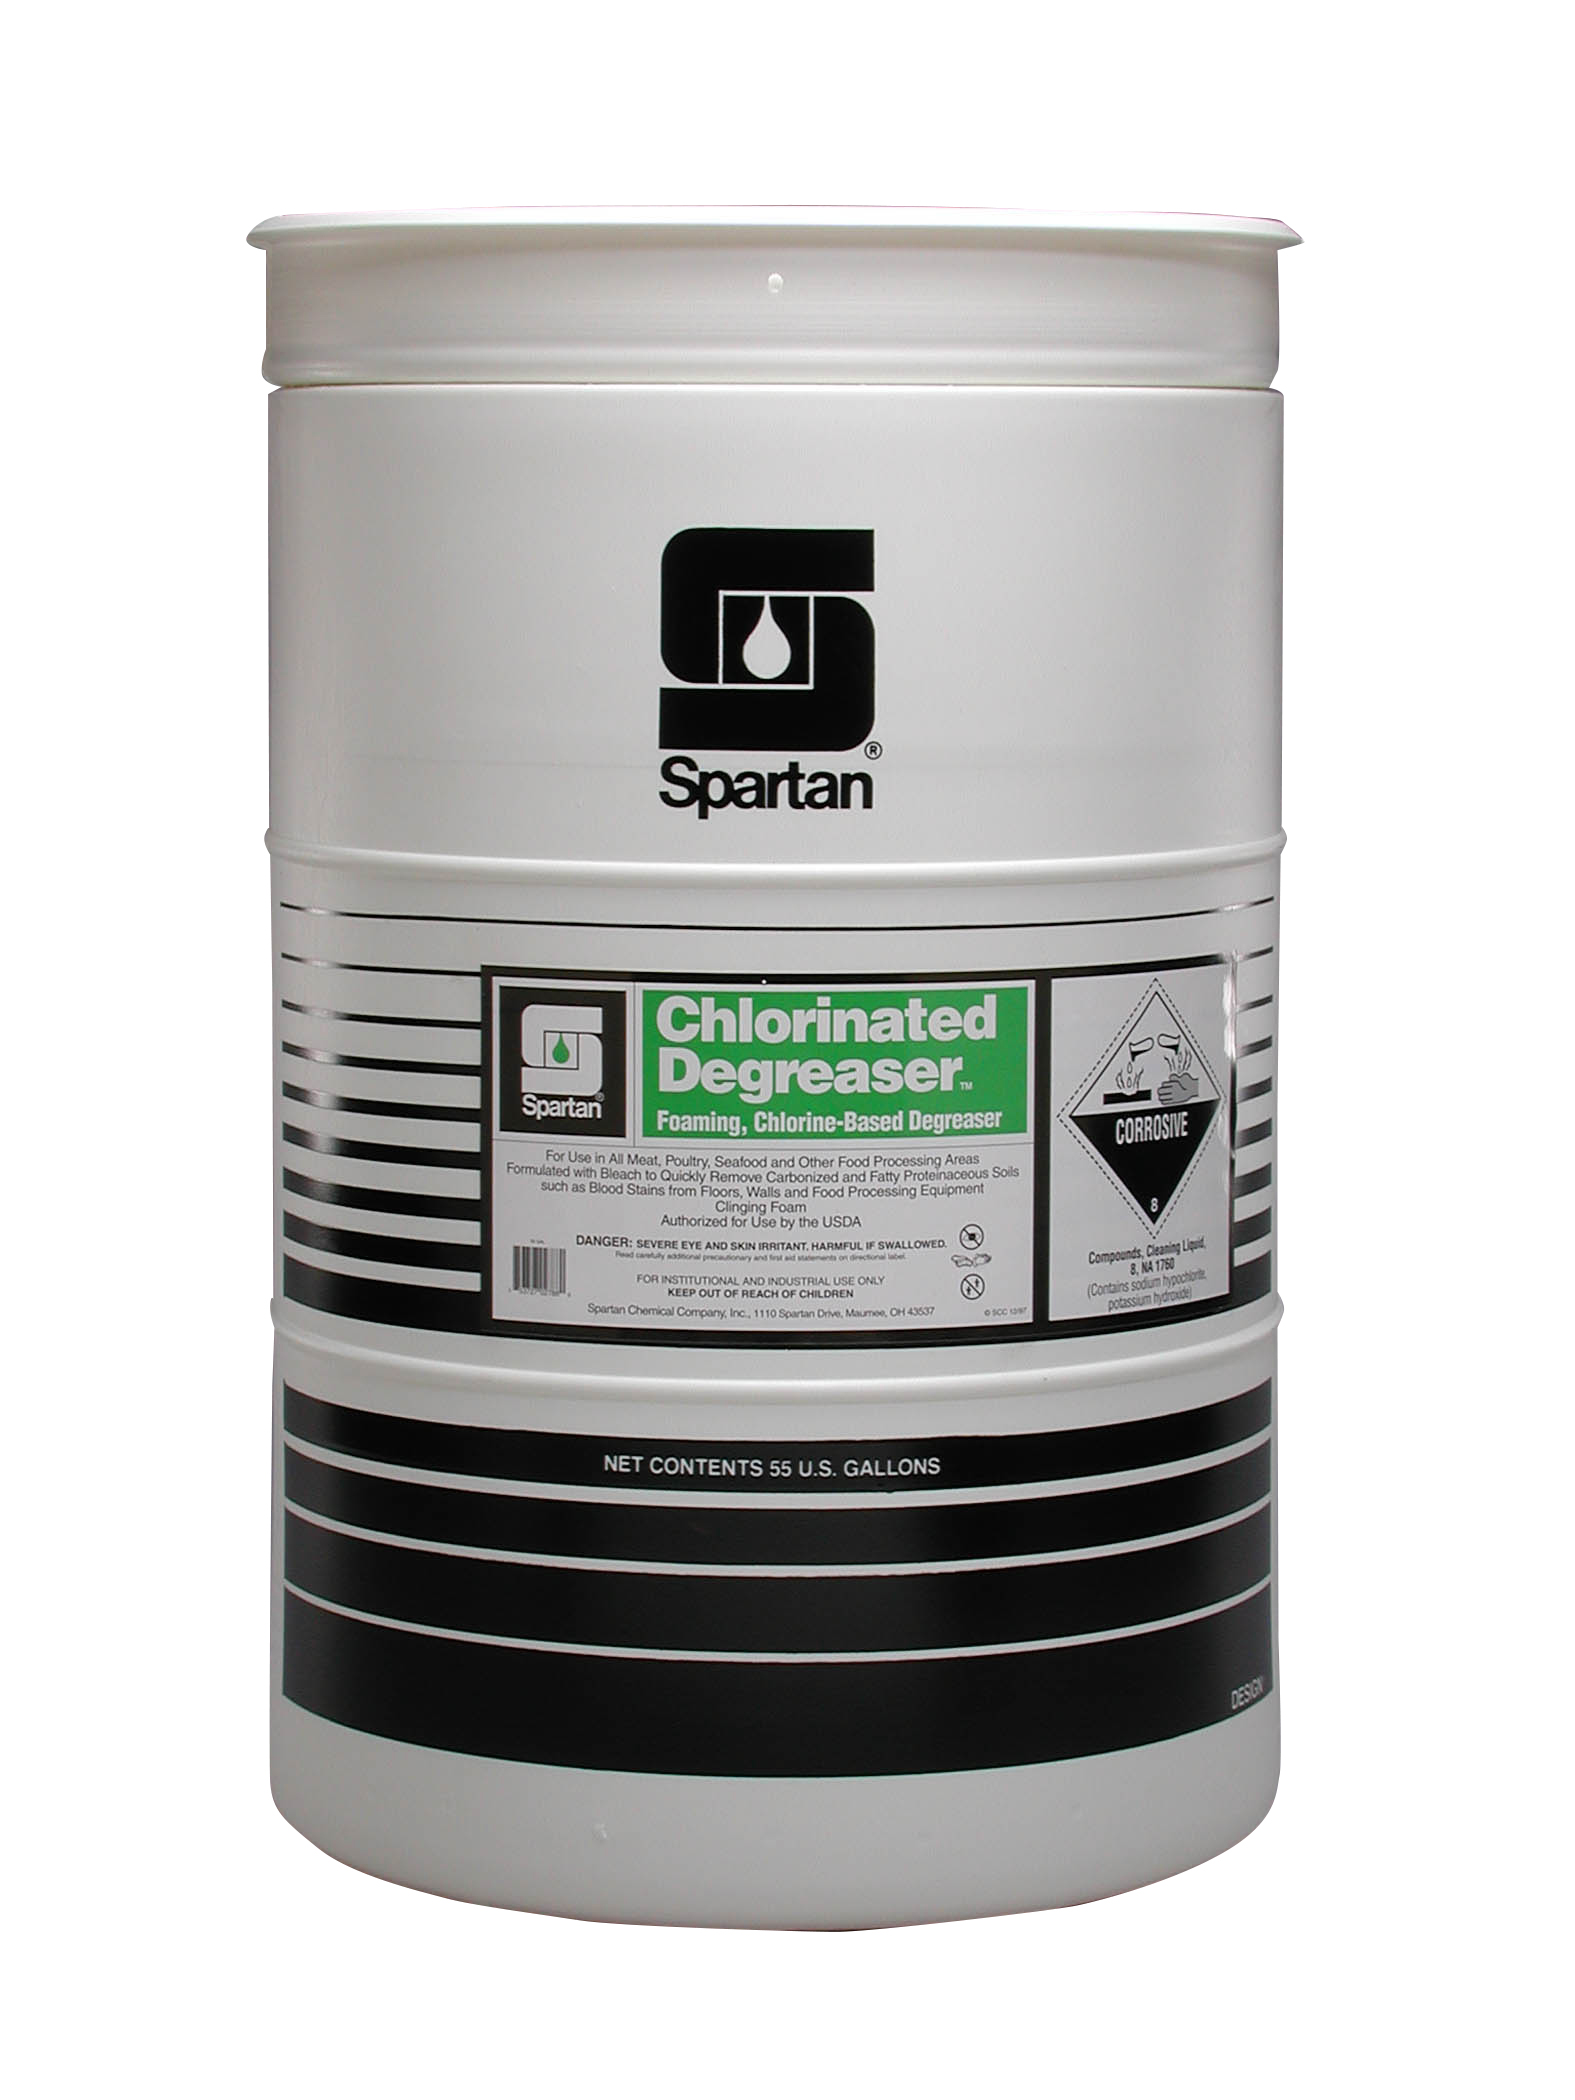 Chlorinated Degreaser 55 gallon drum